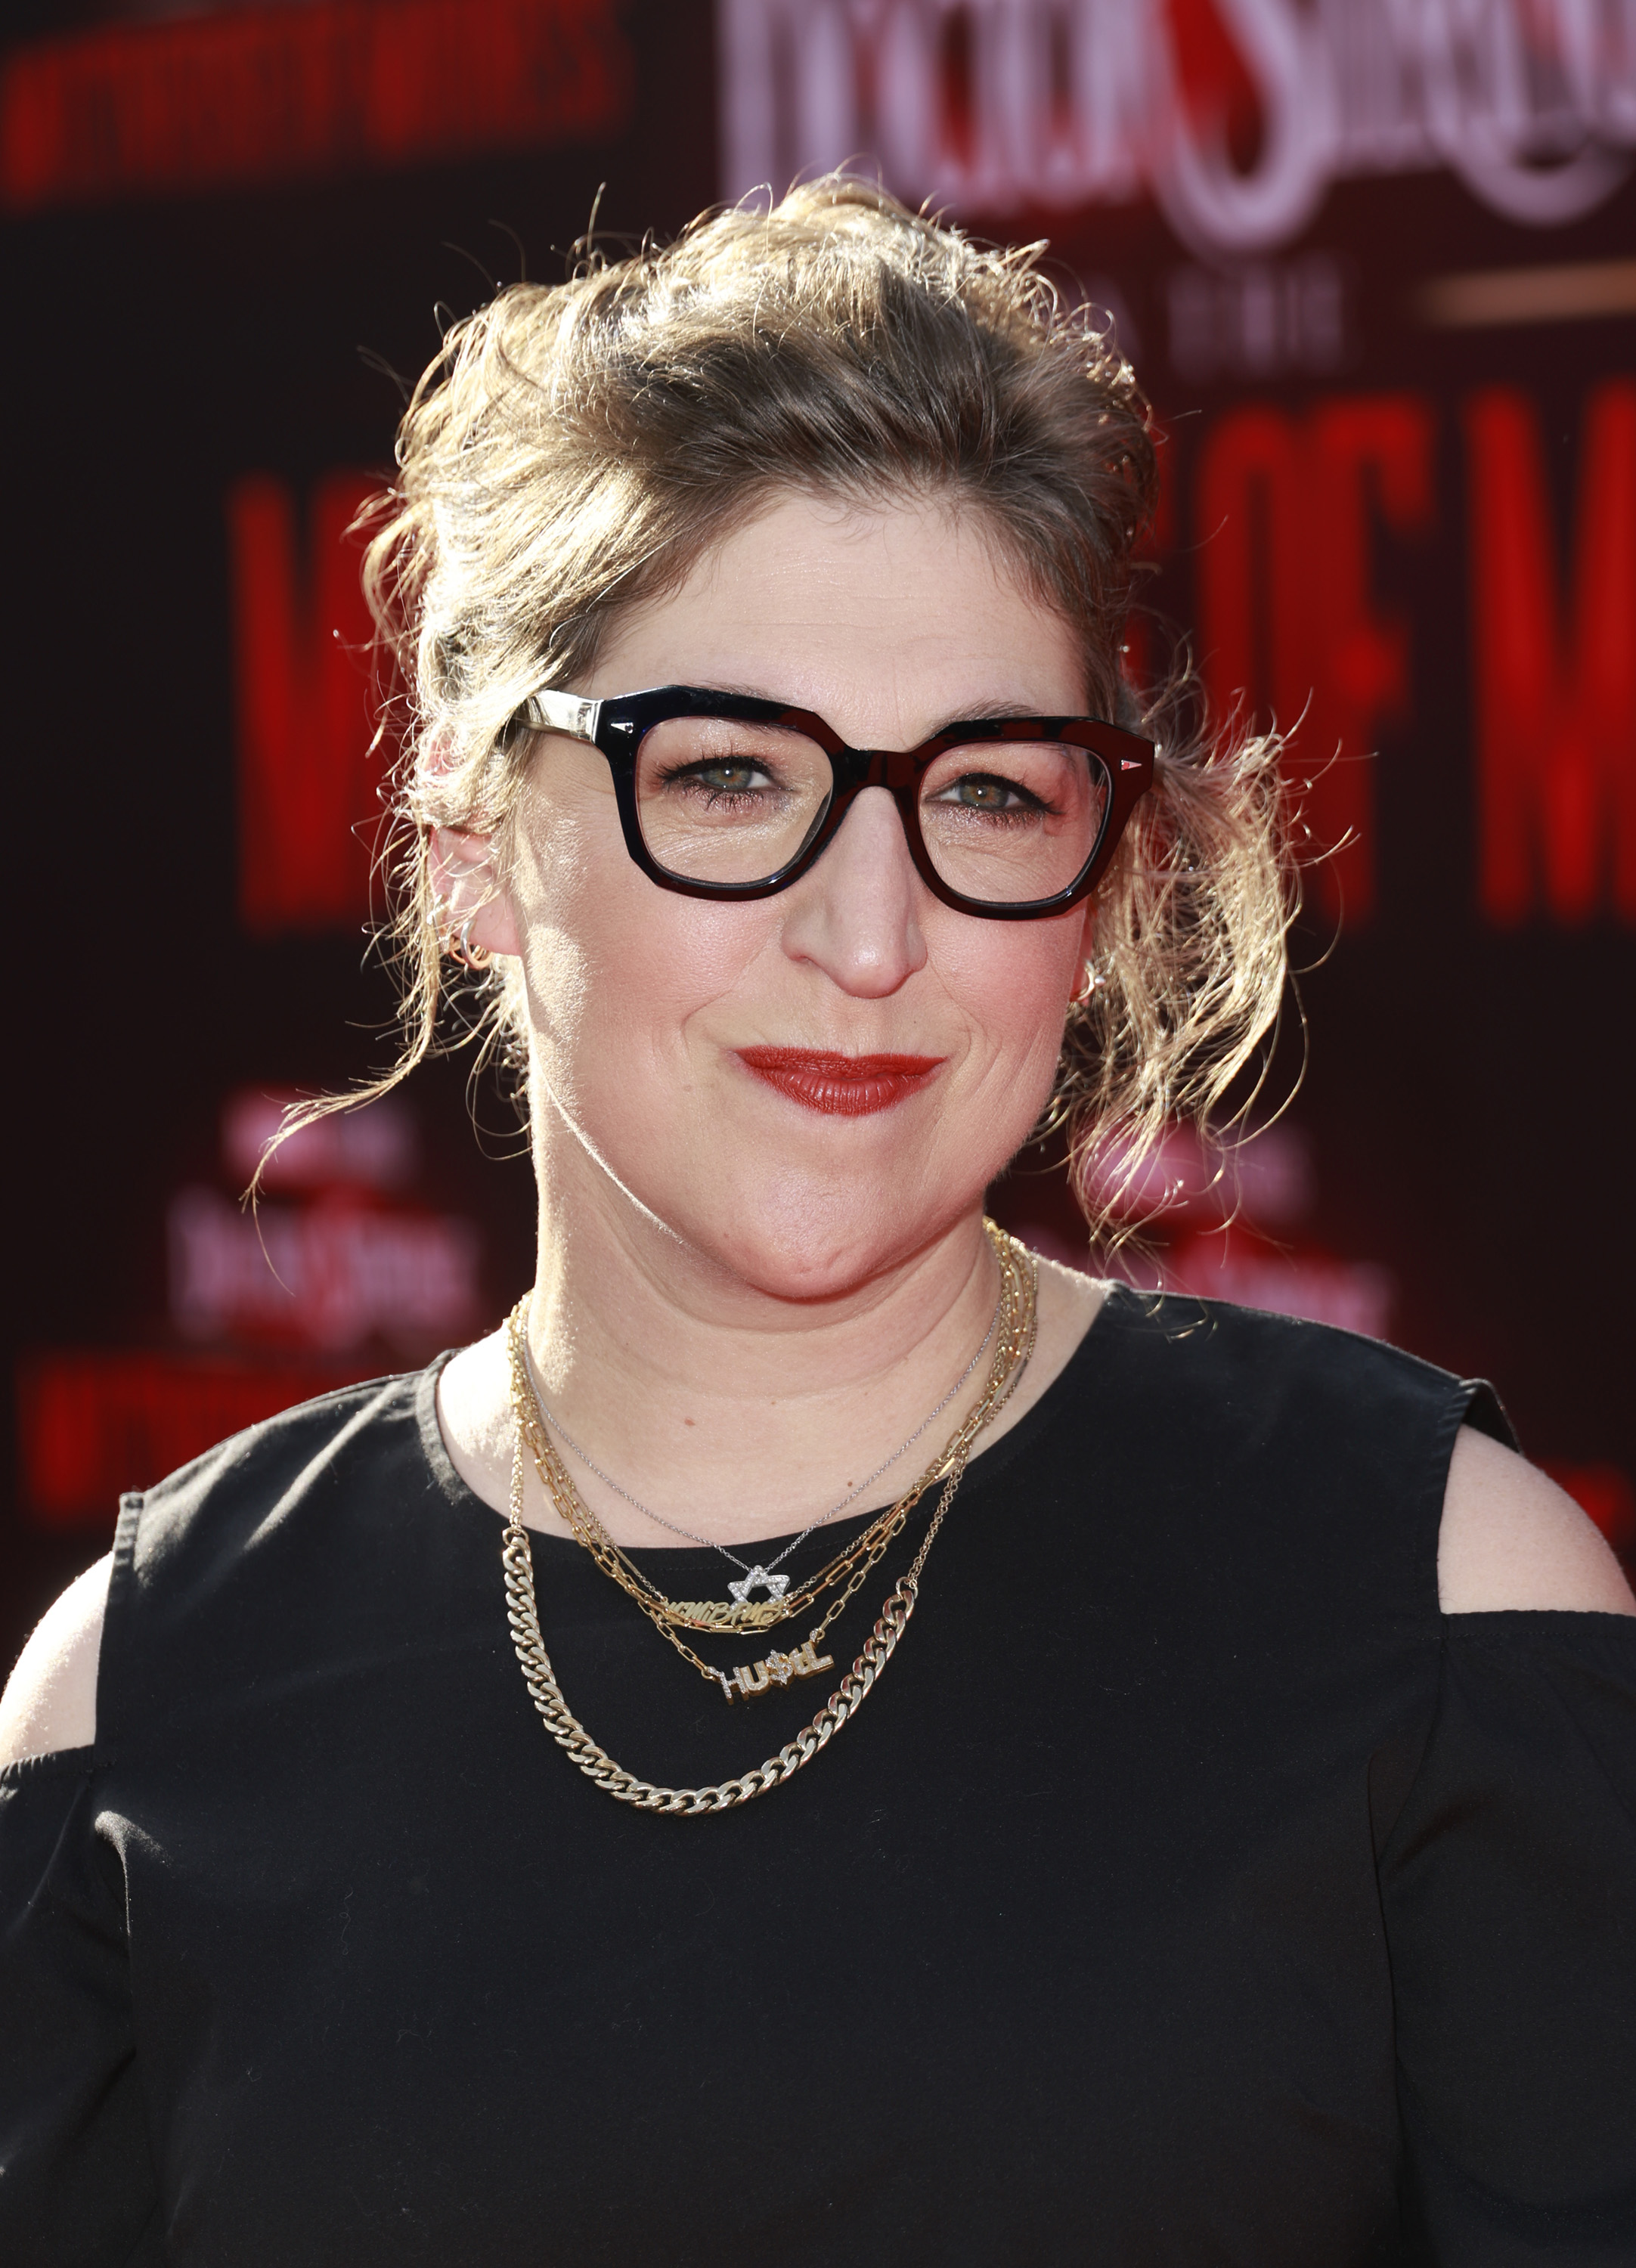 Mayim Bialik attends "Doctor Strange In The Multiverse Of Madness" premiere at Dolby Theatre on May 02, 2022 in Hollywood, California | Source: Getty Images